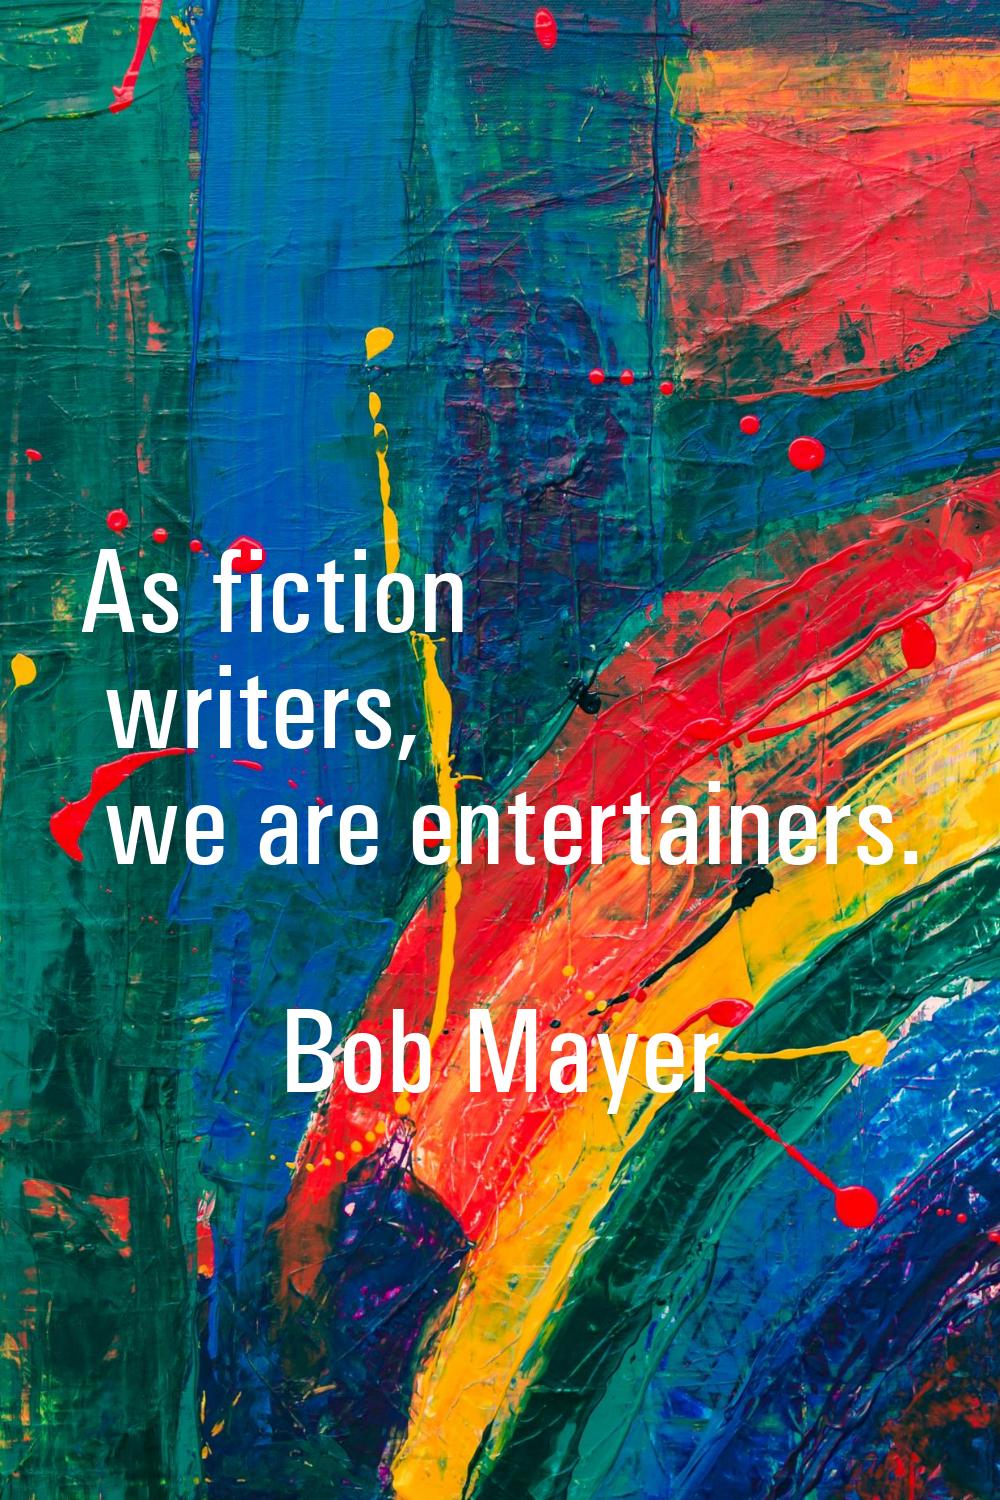 As fiction writers, we are entertainers.